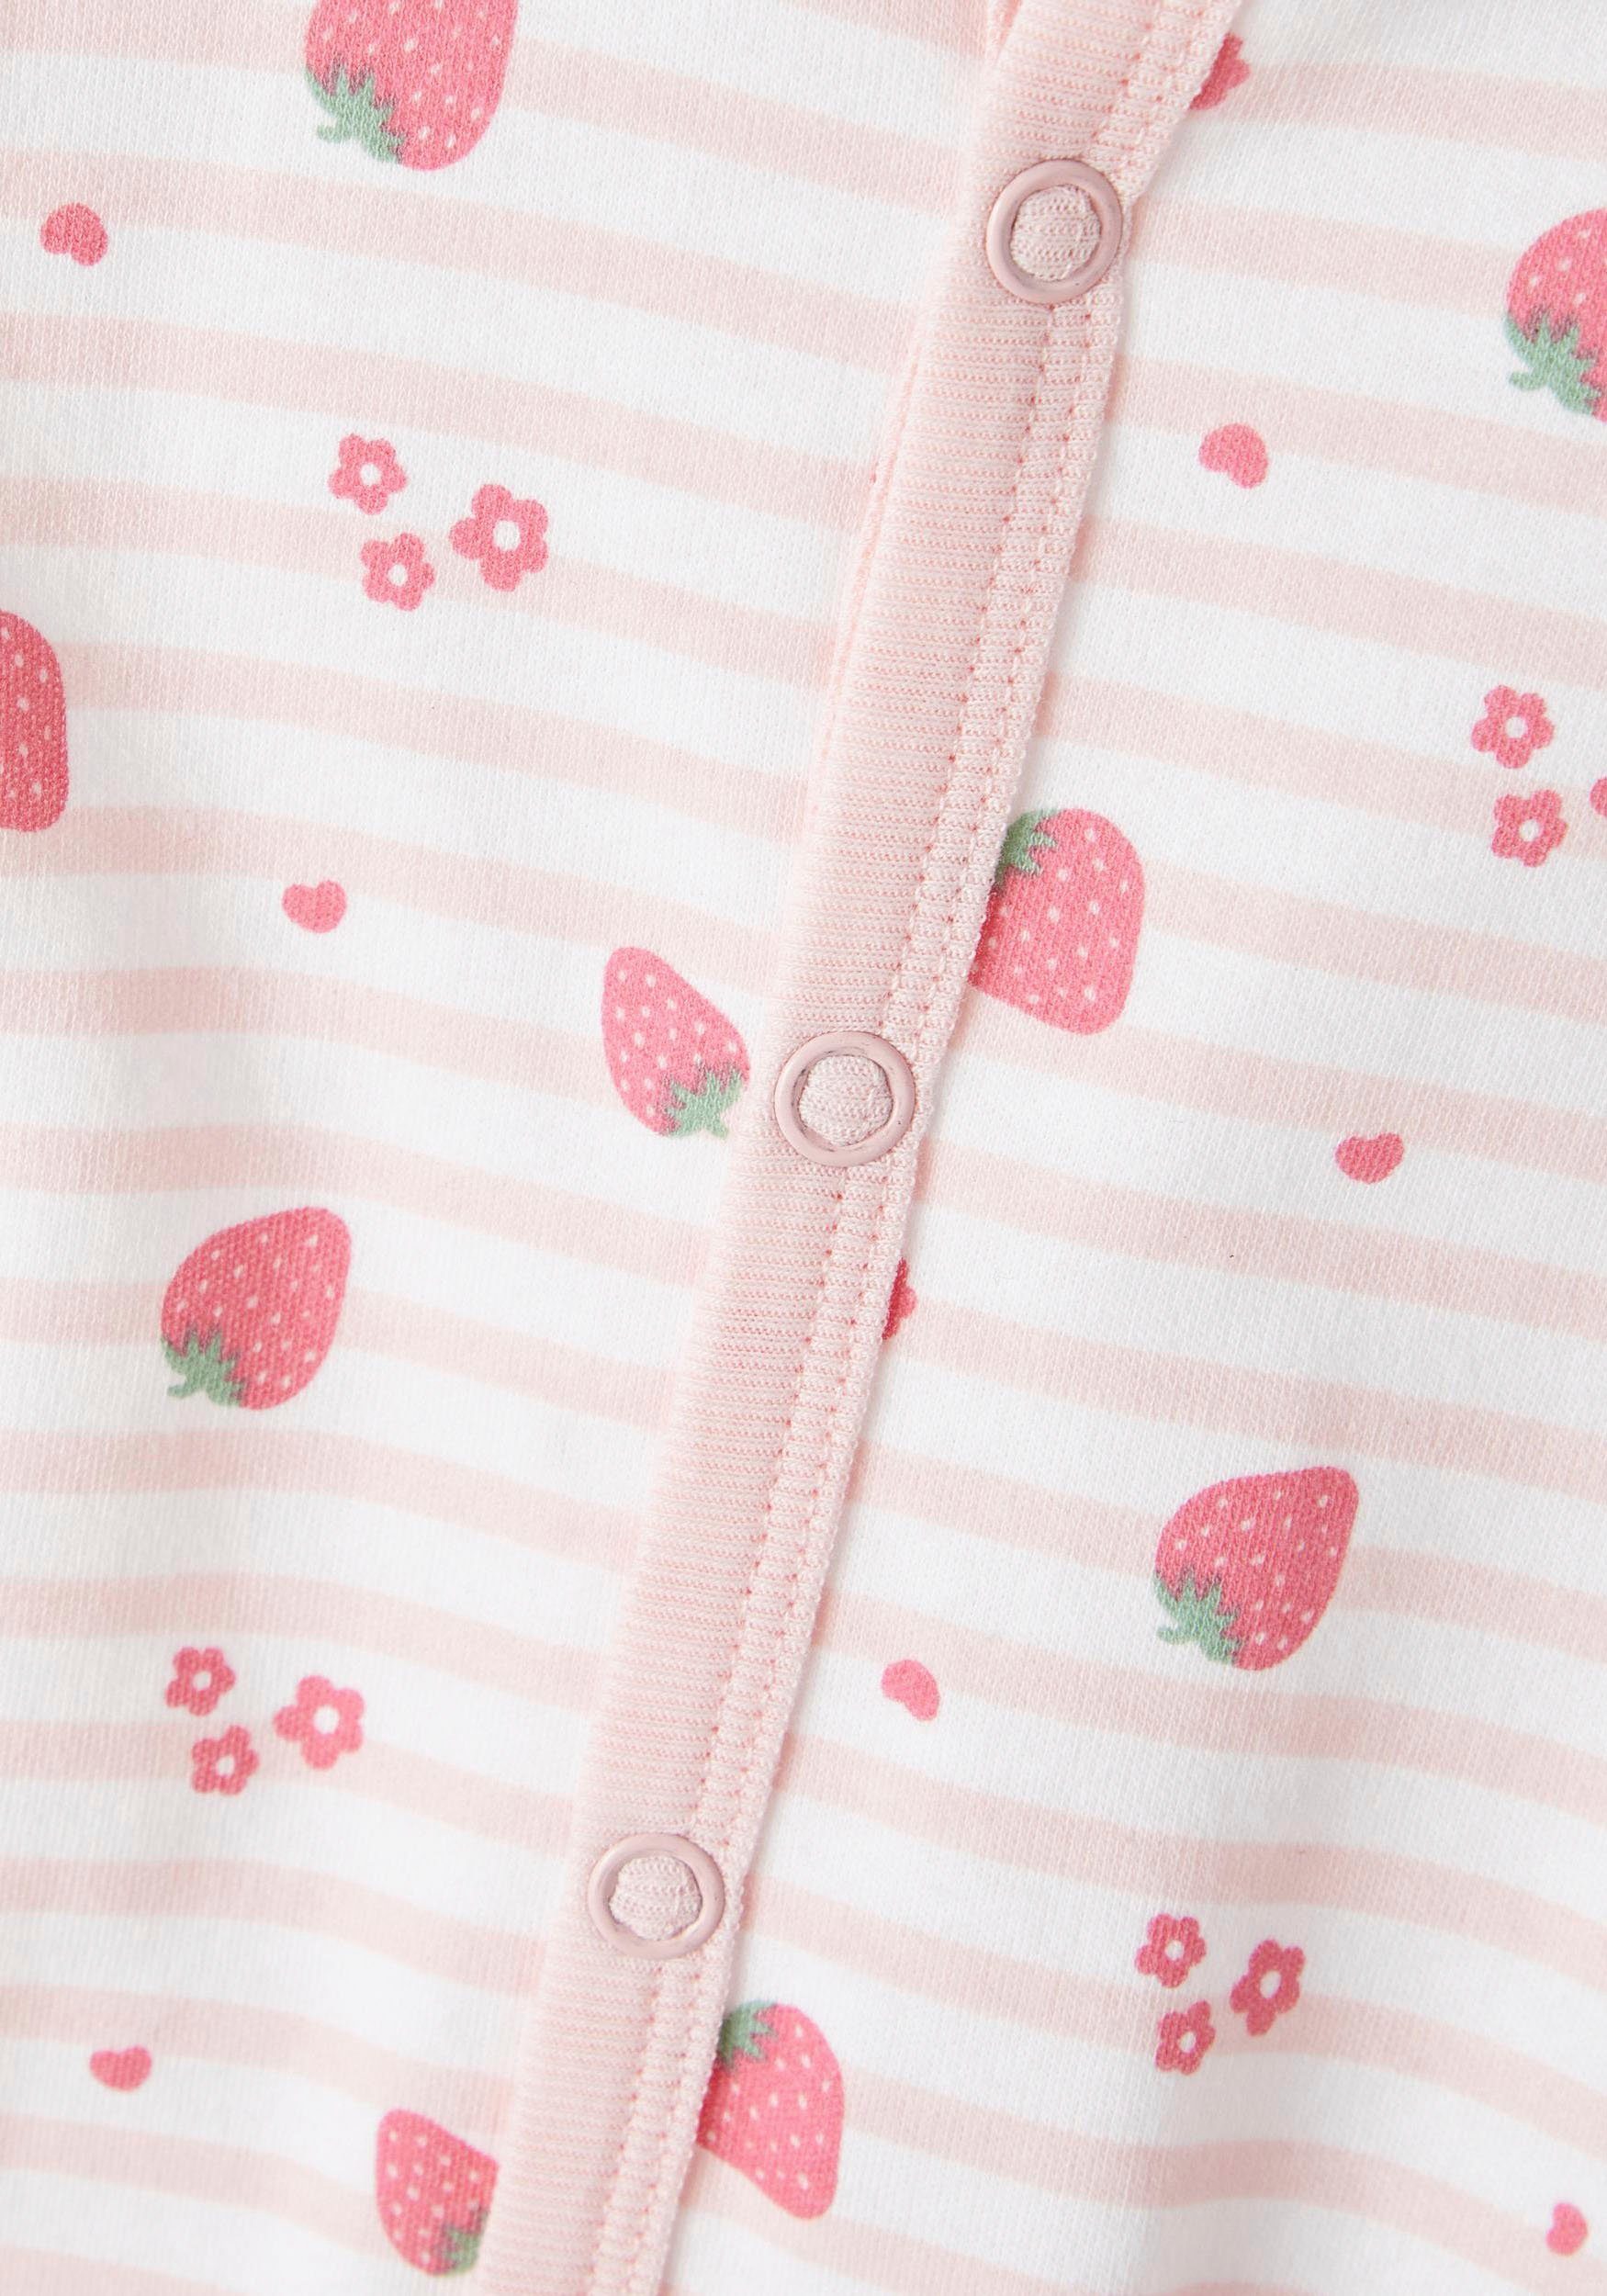 NOOS W/F It STRAWBERRY Schlafoverall (Packung, 2-tlg) 2P NBFNIGHTSUIT Name